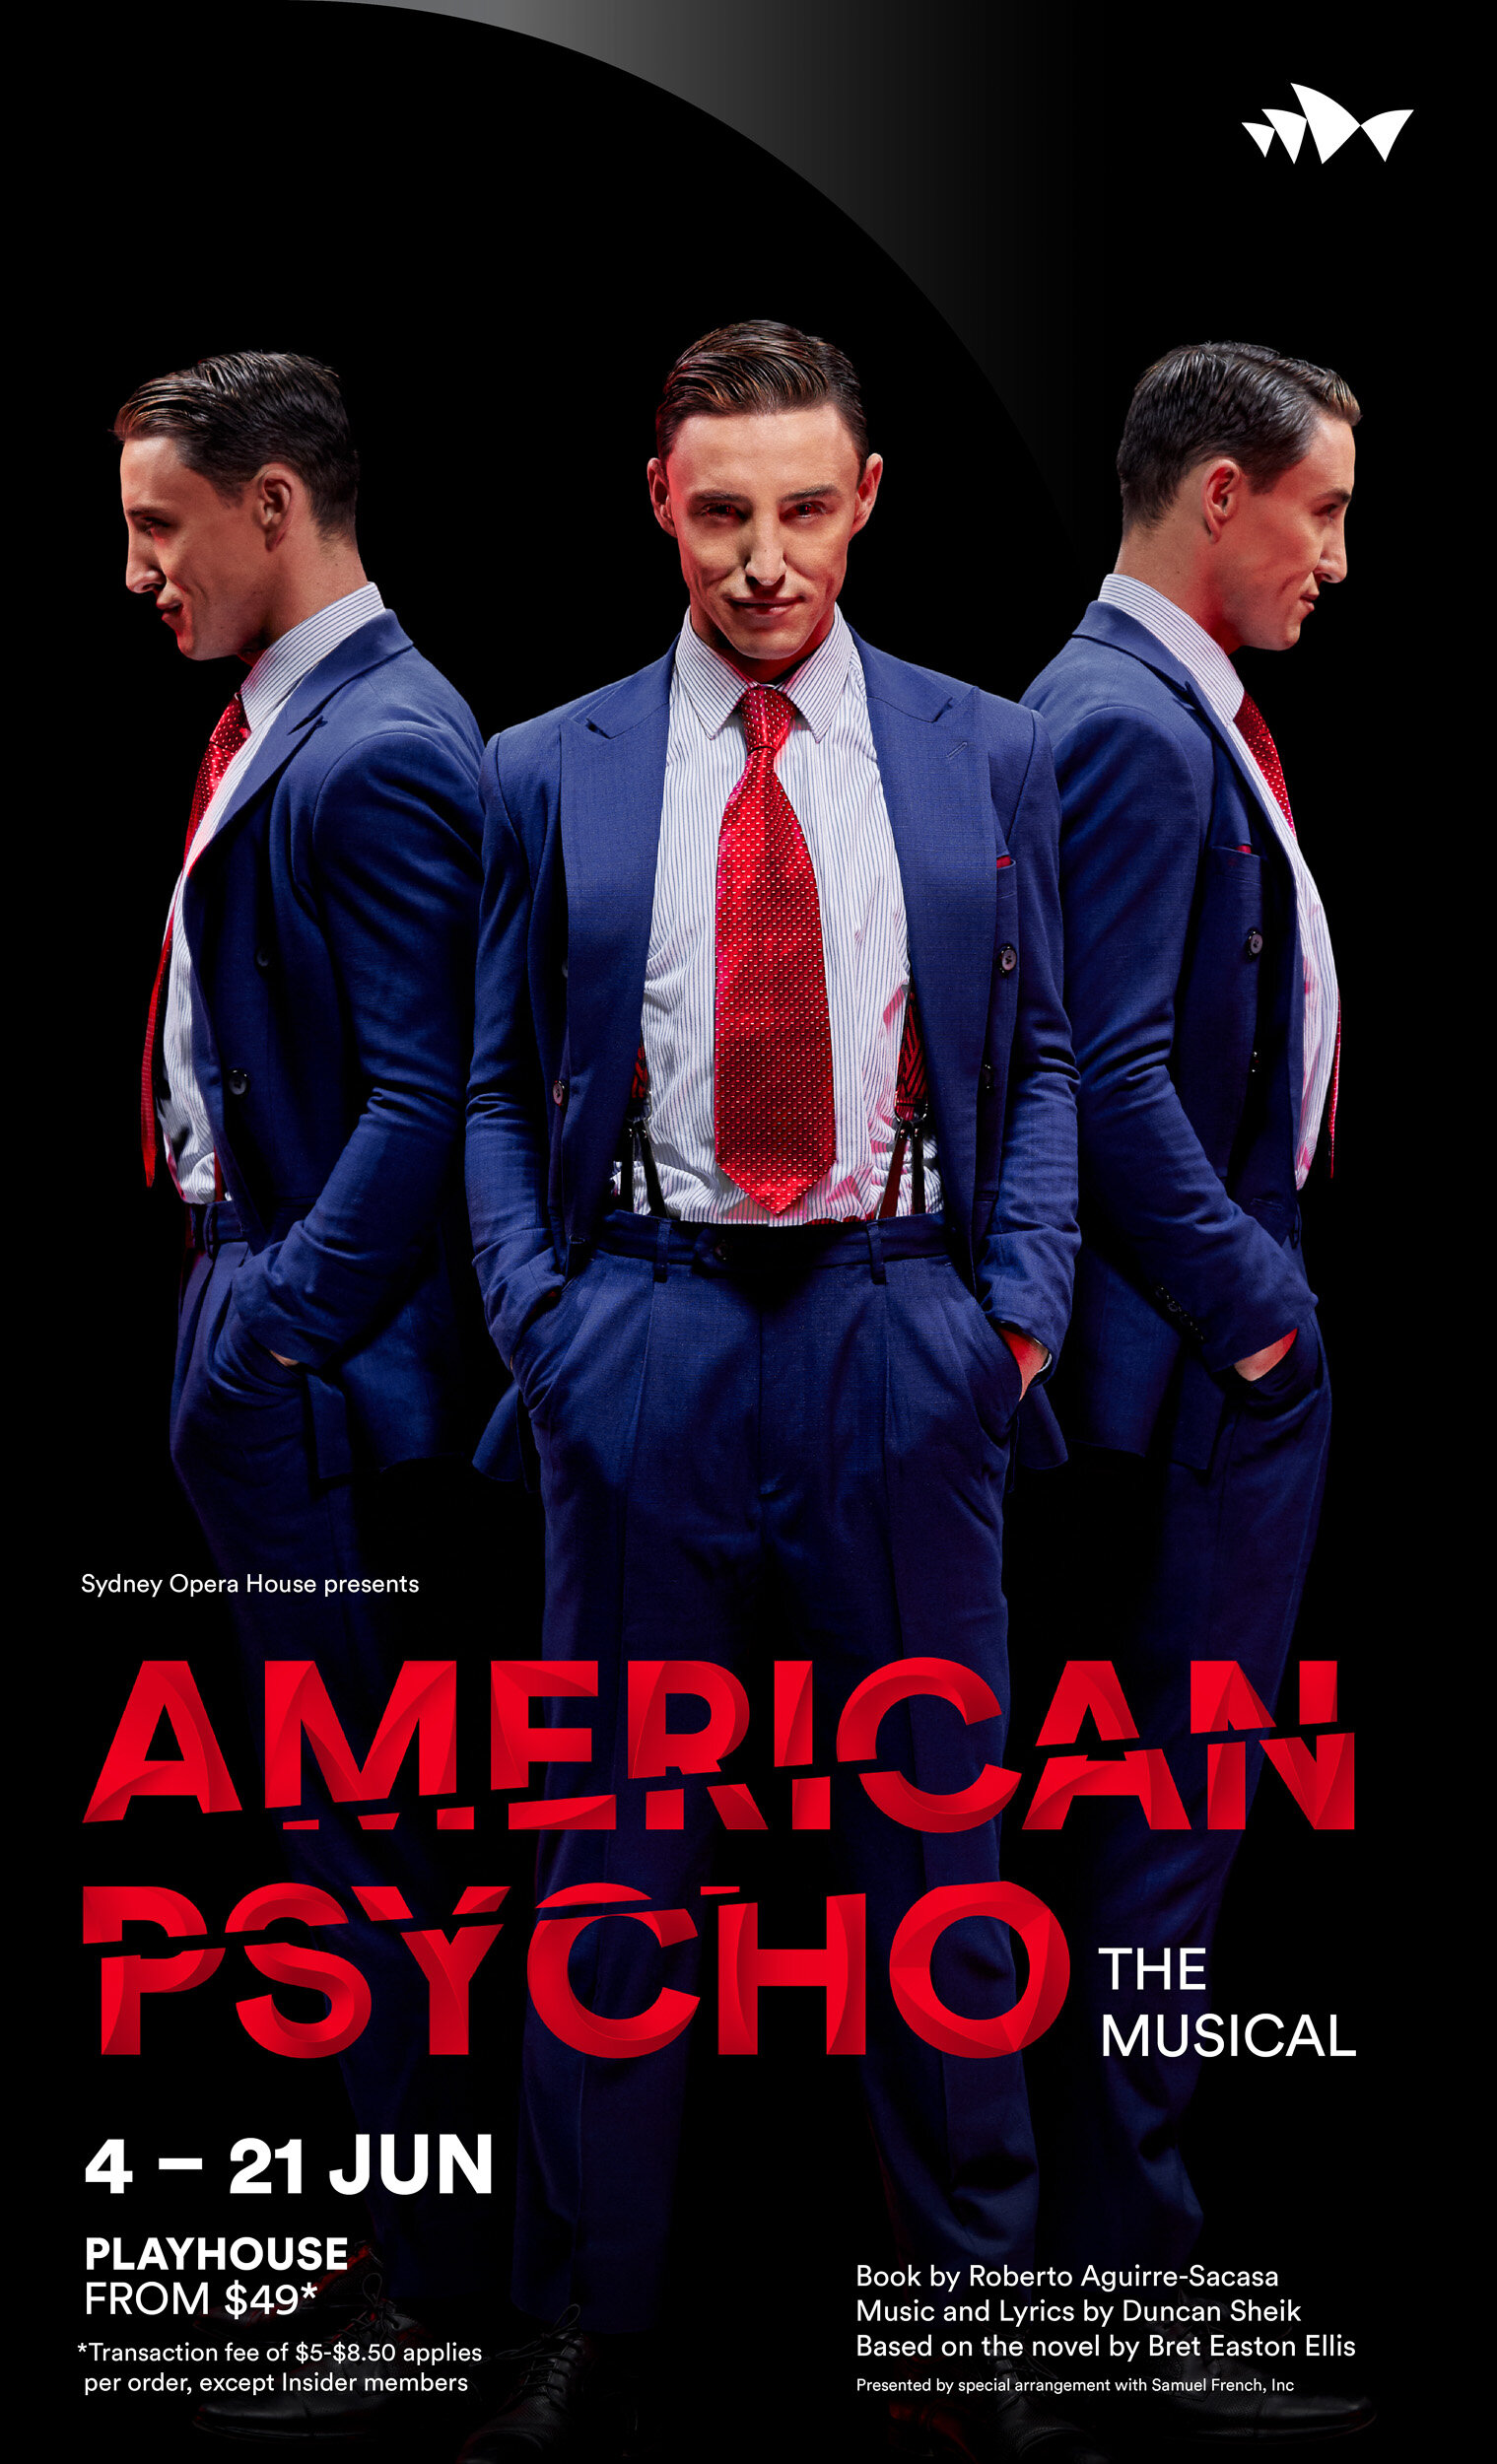 American Psycho The Musical poster for Sydney Opera House